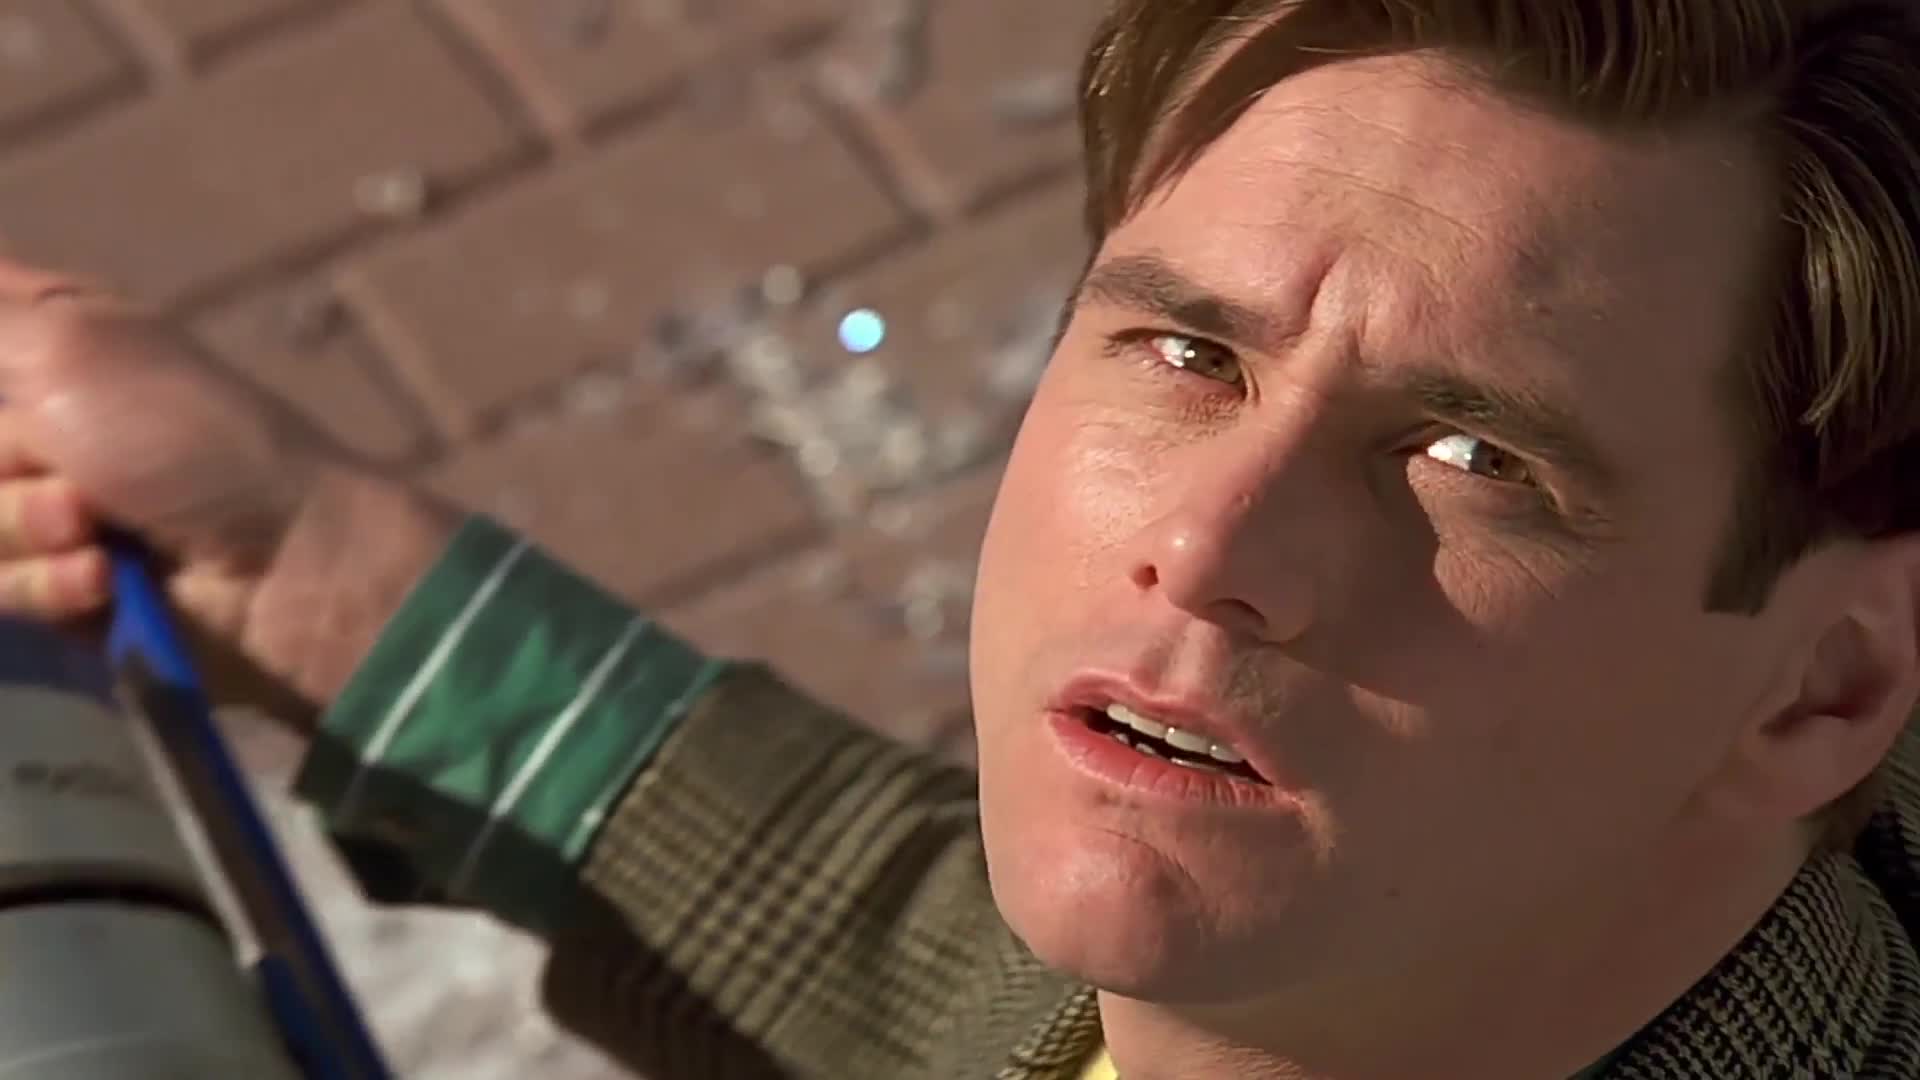 Download The Truman Show Free Wallpapers for Mobile Phones Wallpaper   GetWallsio